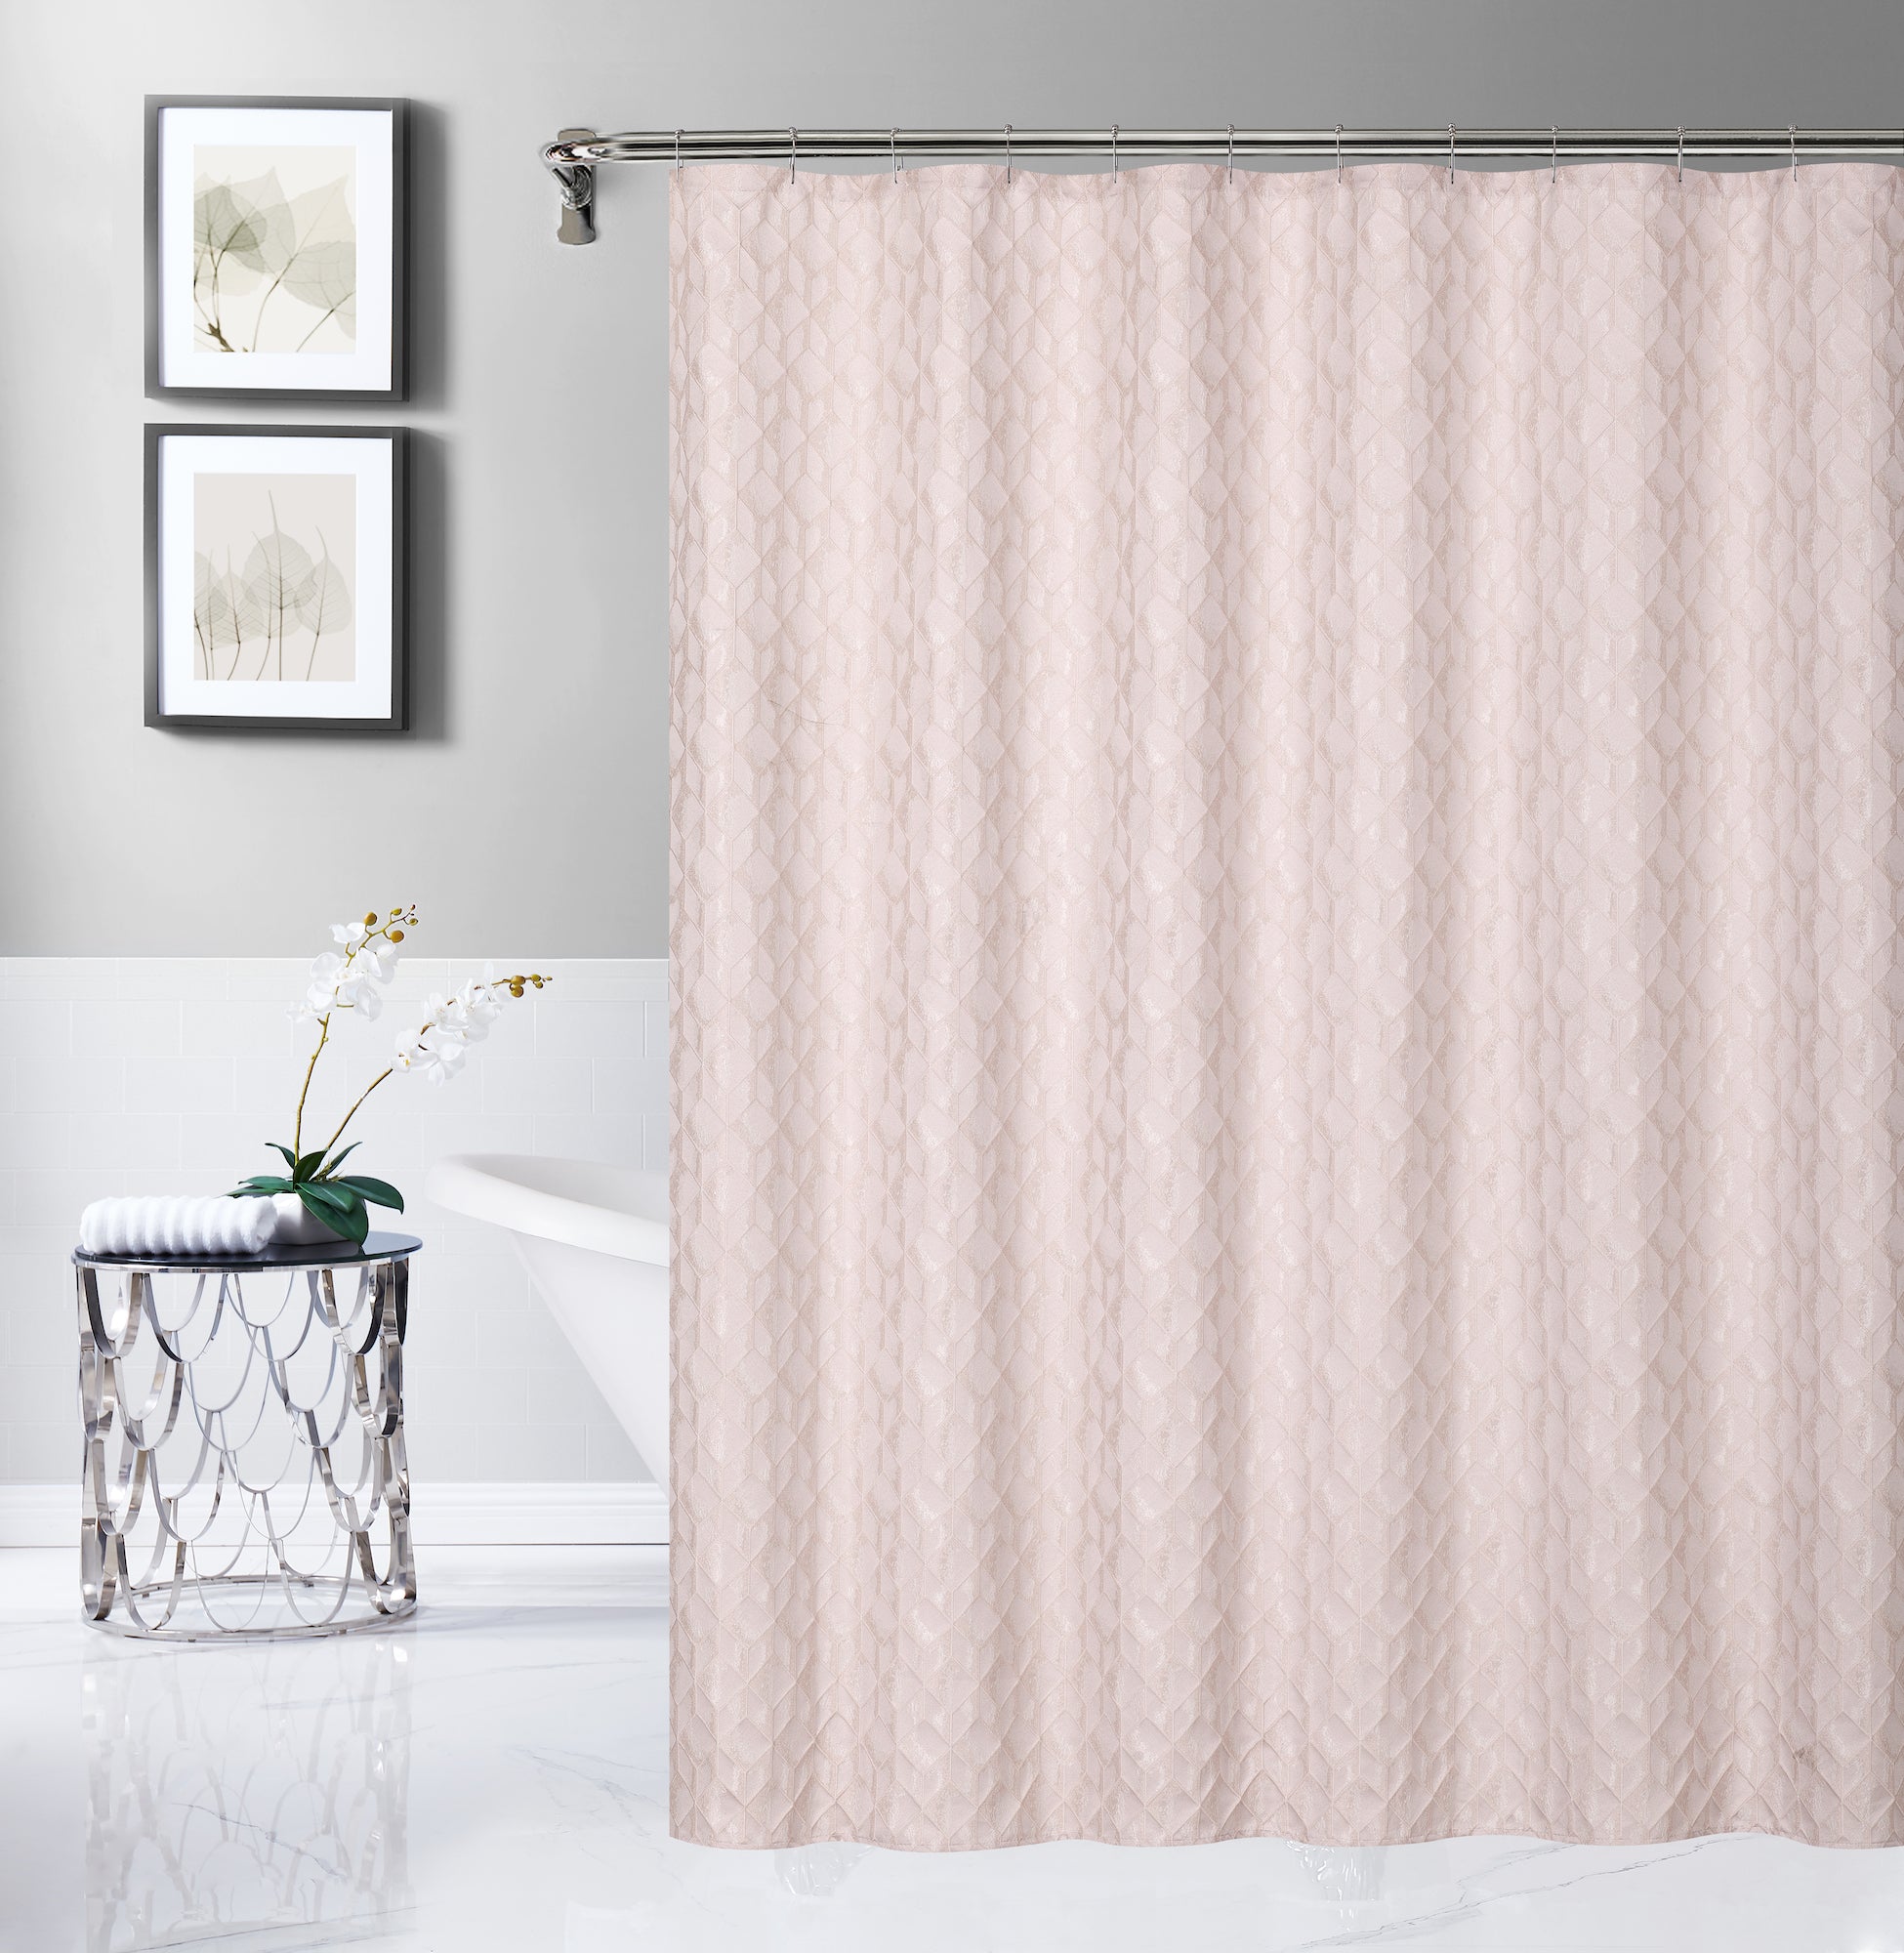 Dainty Home Topaz 3D Embossed Textured Lustrous Lurex Geometric Designed Fabric Shower Curtain